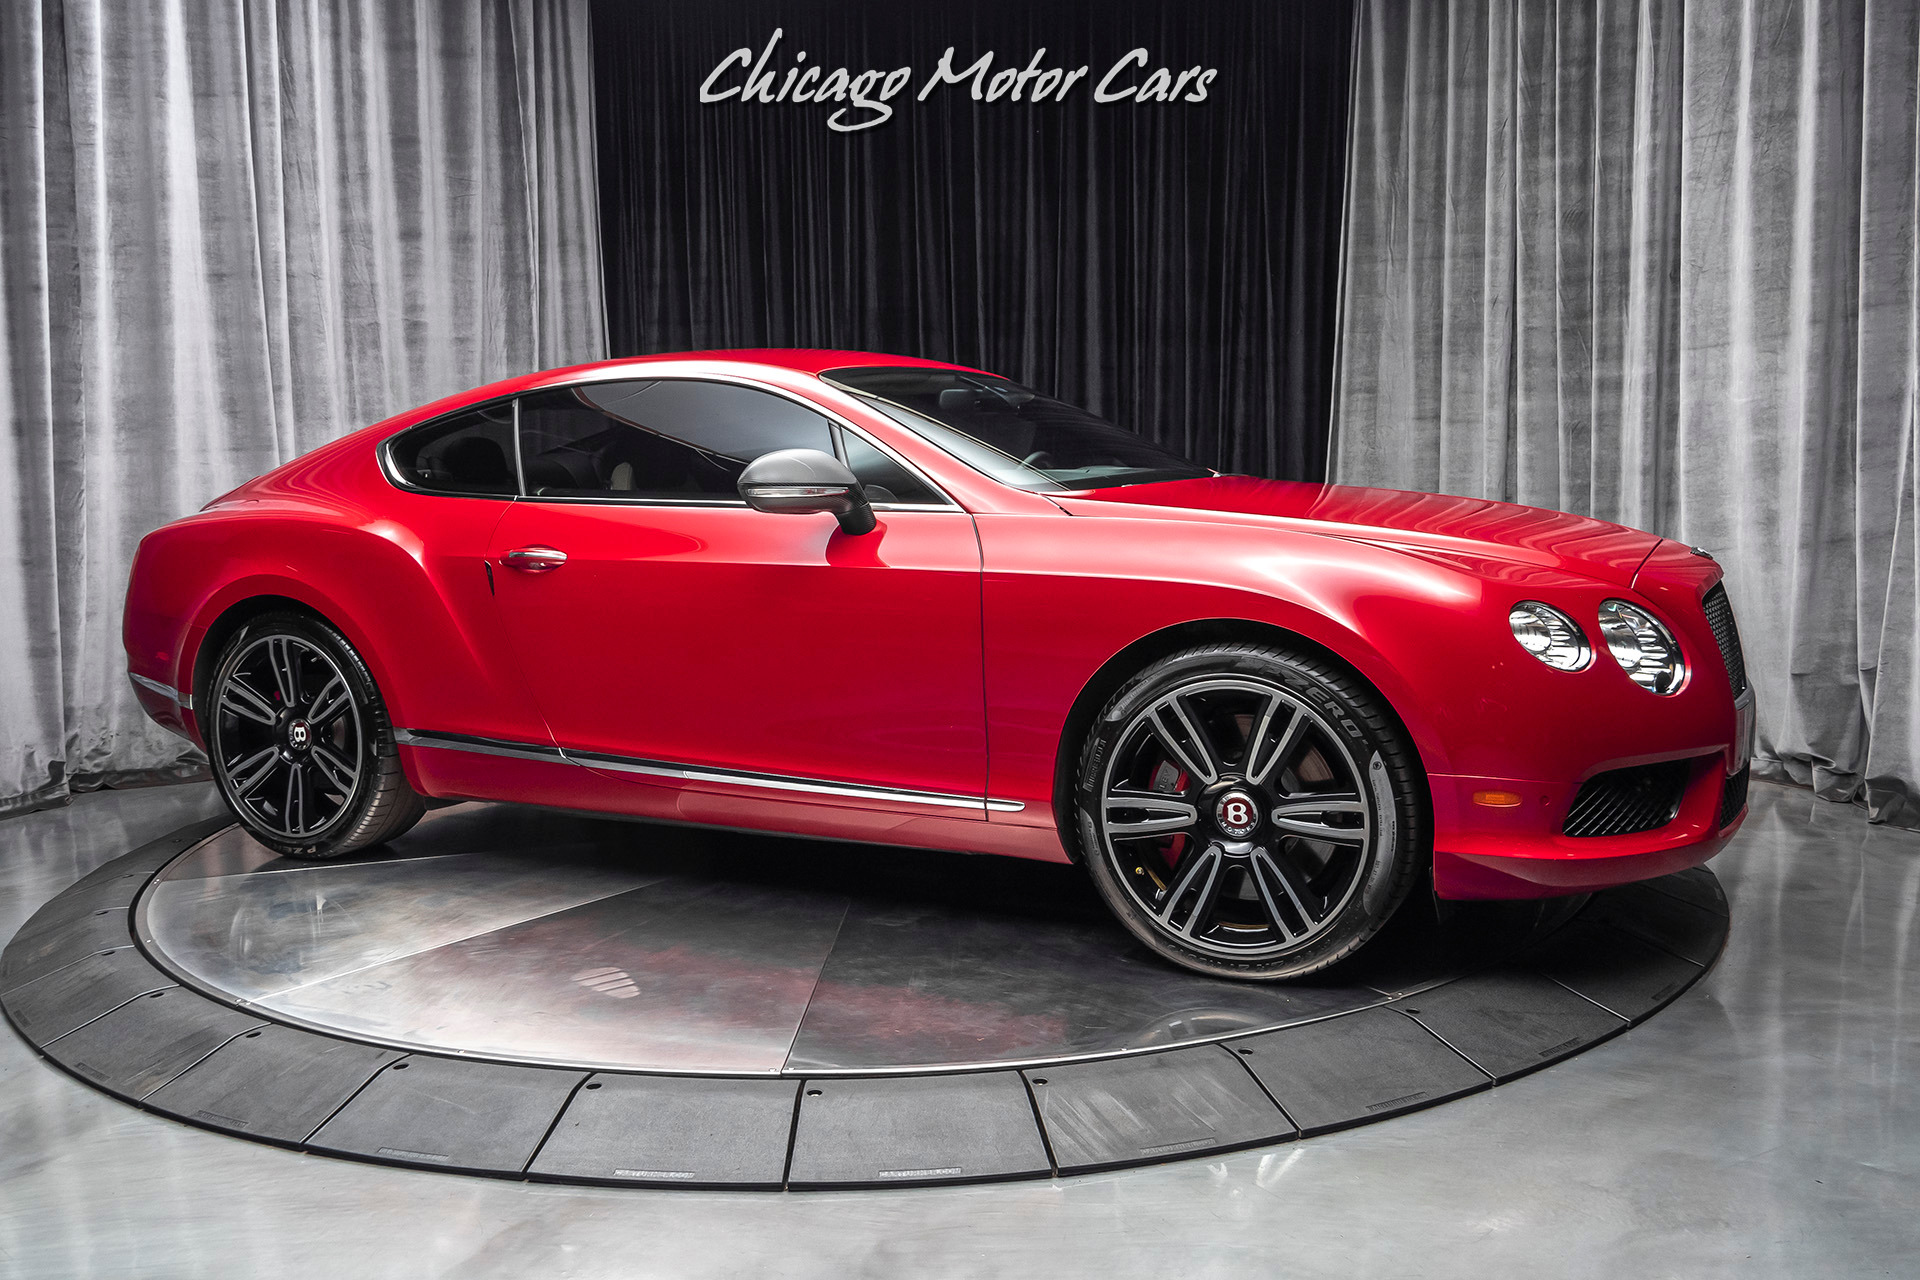 Used 2013 Bentley Continental GT Mulliner Package! RARE Dragon Red! For Sale (Special Pricing) | Chicago Motor Cars Stock #17377